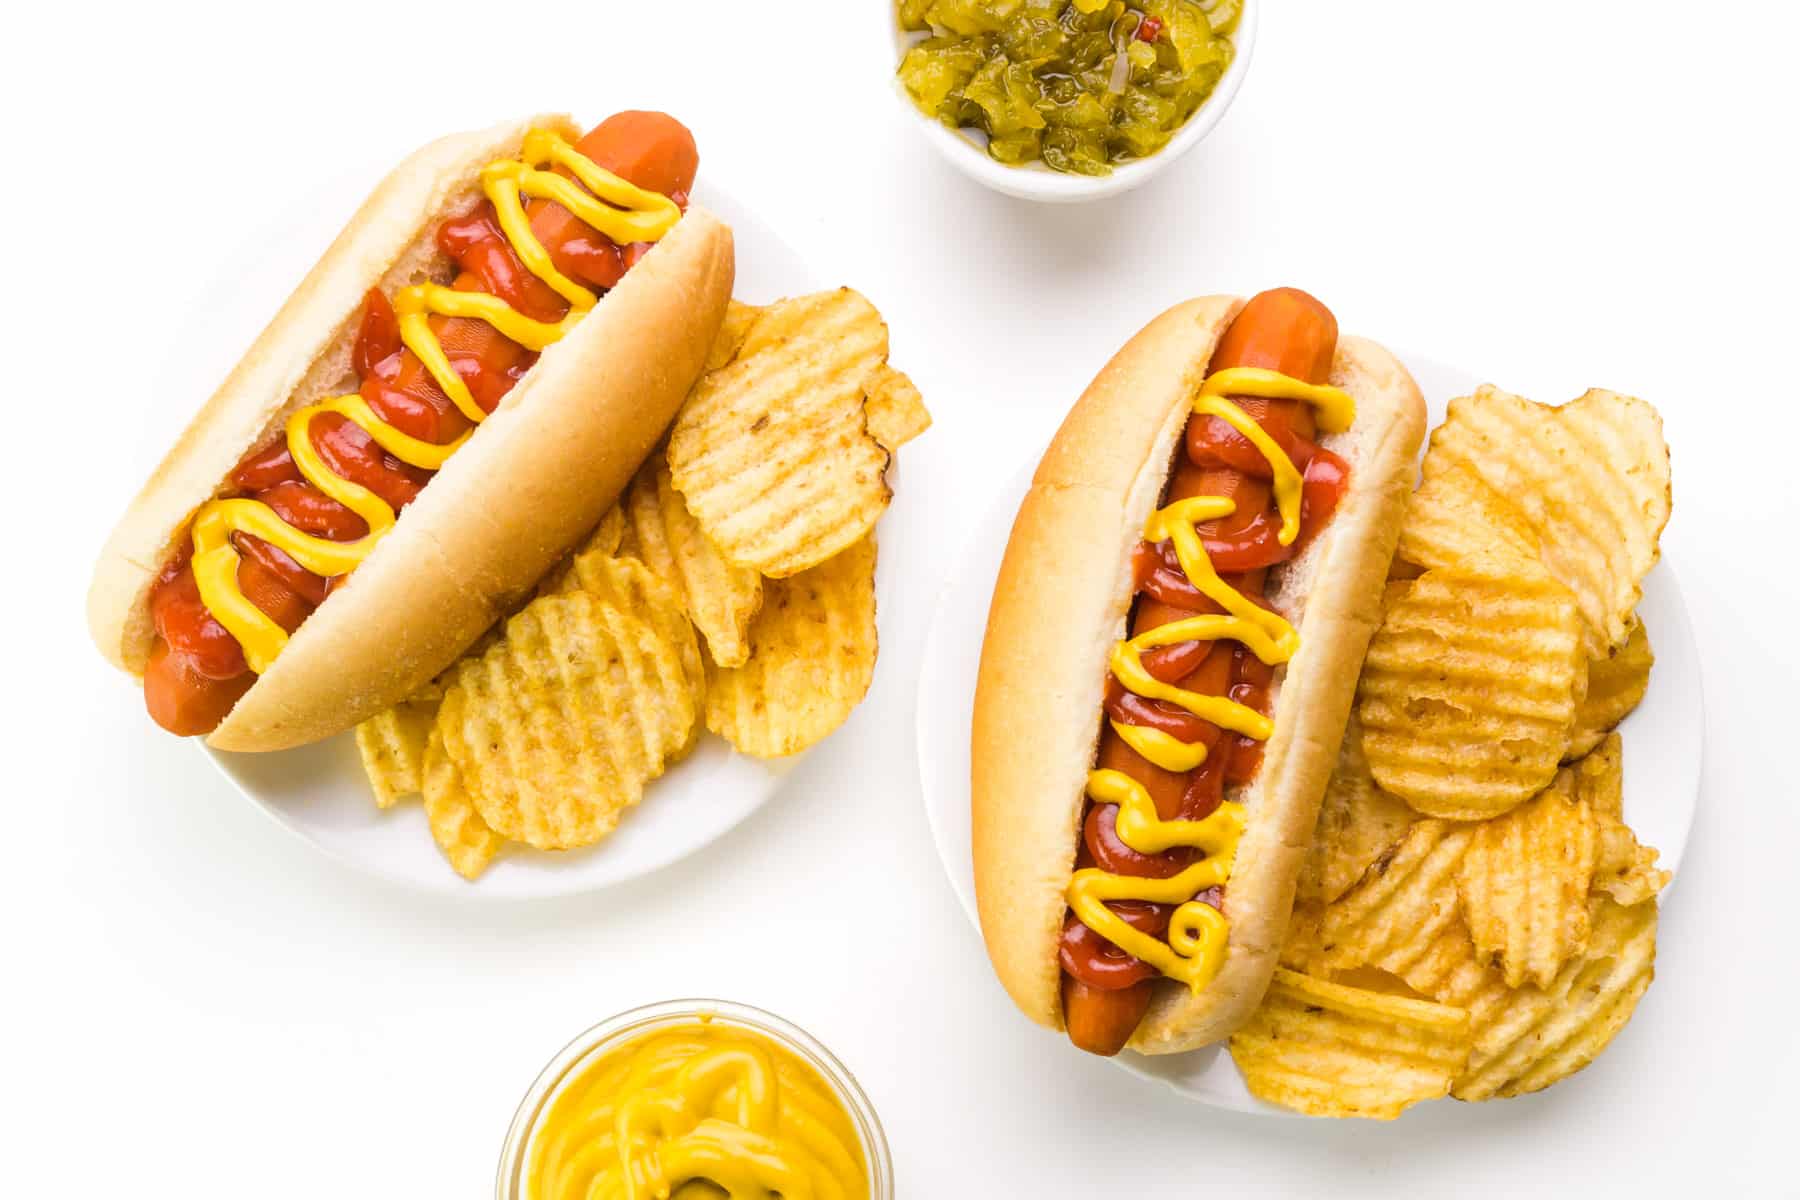 Looking down on plant-based hot dogs on plates sitting next to potato chips. There are bowls of relish and mustard nearby.